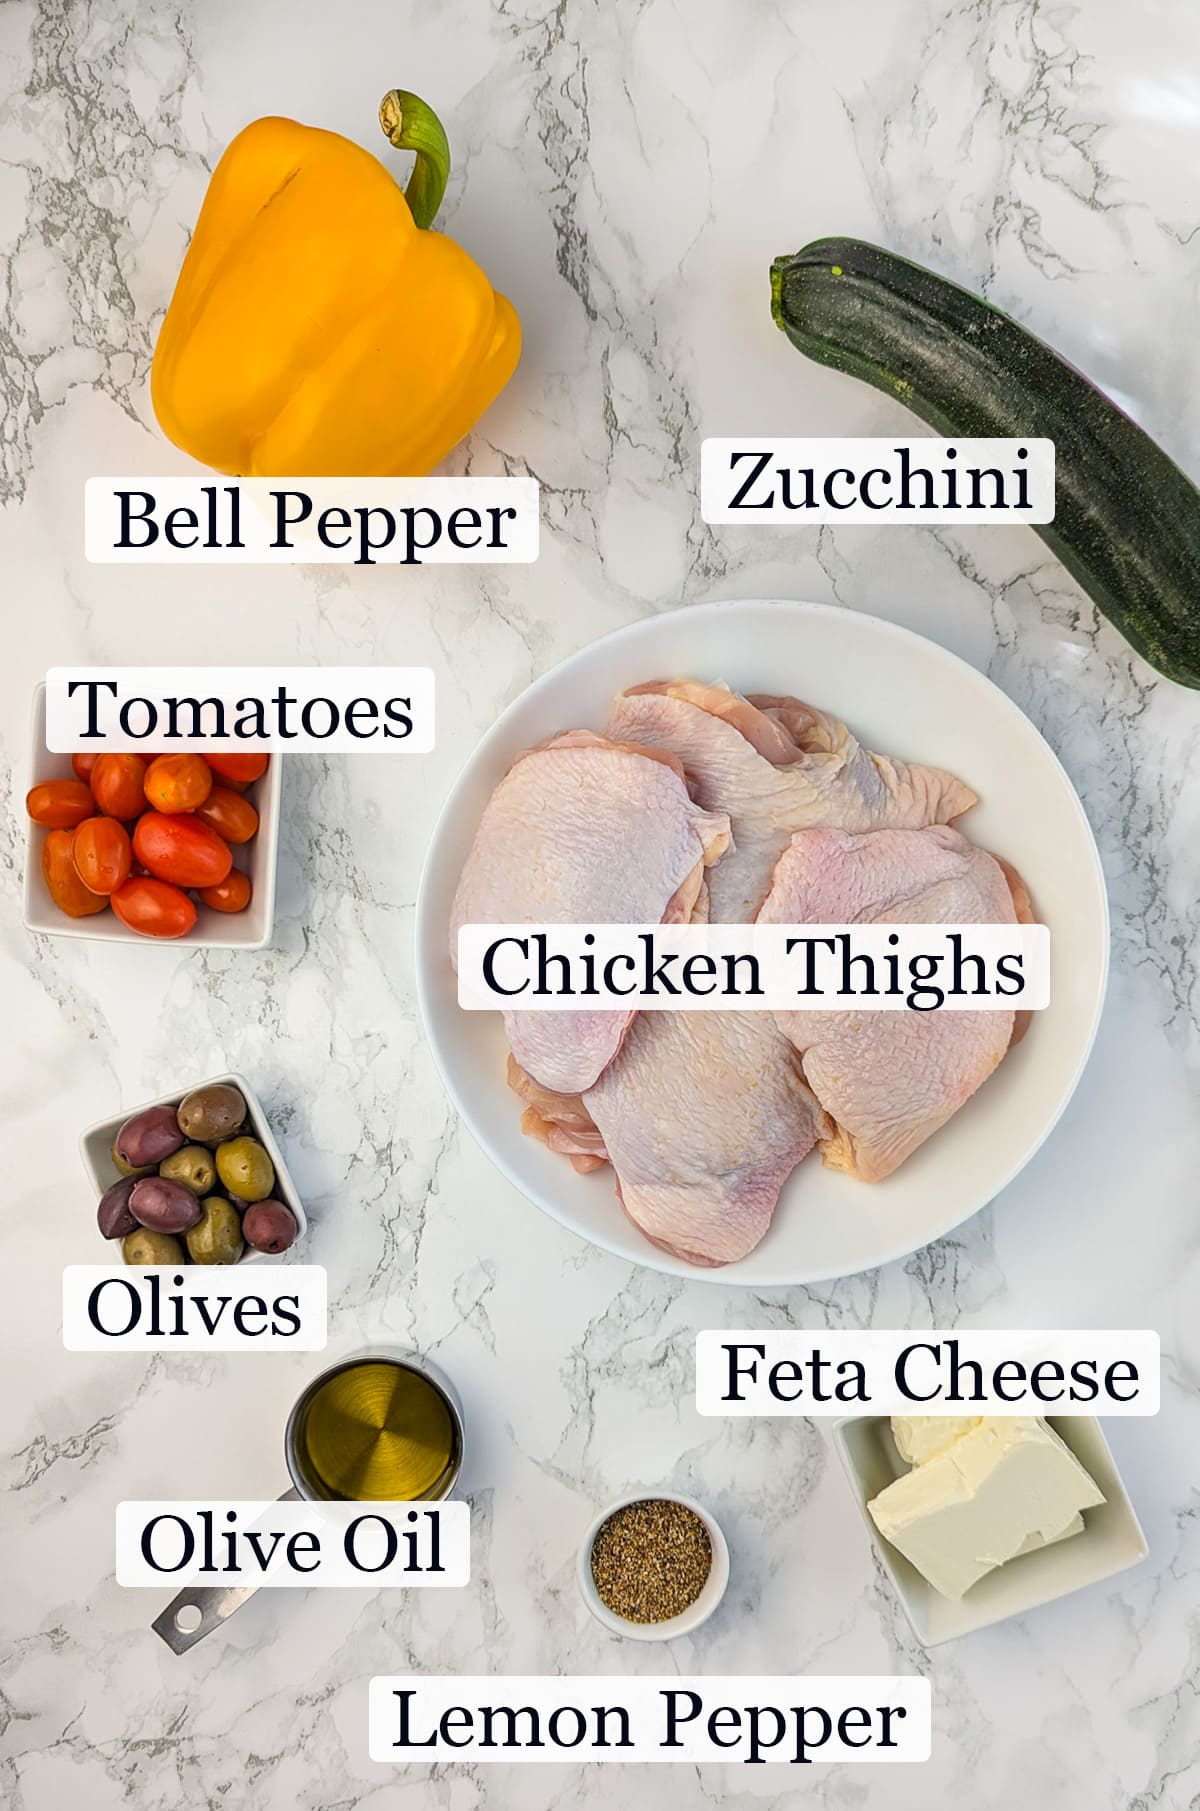 Ingredients for Greek chicken displayed on a marble countertop, including raw chicken thighs, a yellow bell pepper, a zucchini, cherry tomatoes, olives, olive oil, spices, and feta cheese.